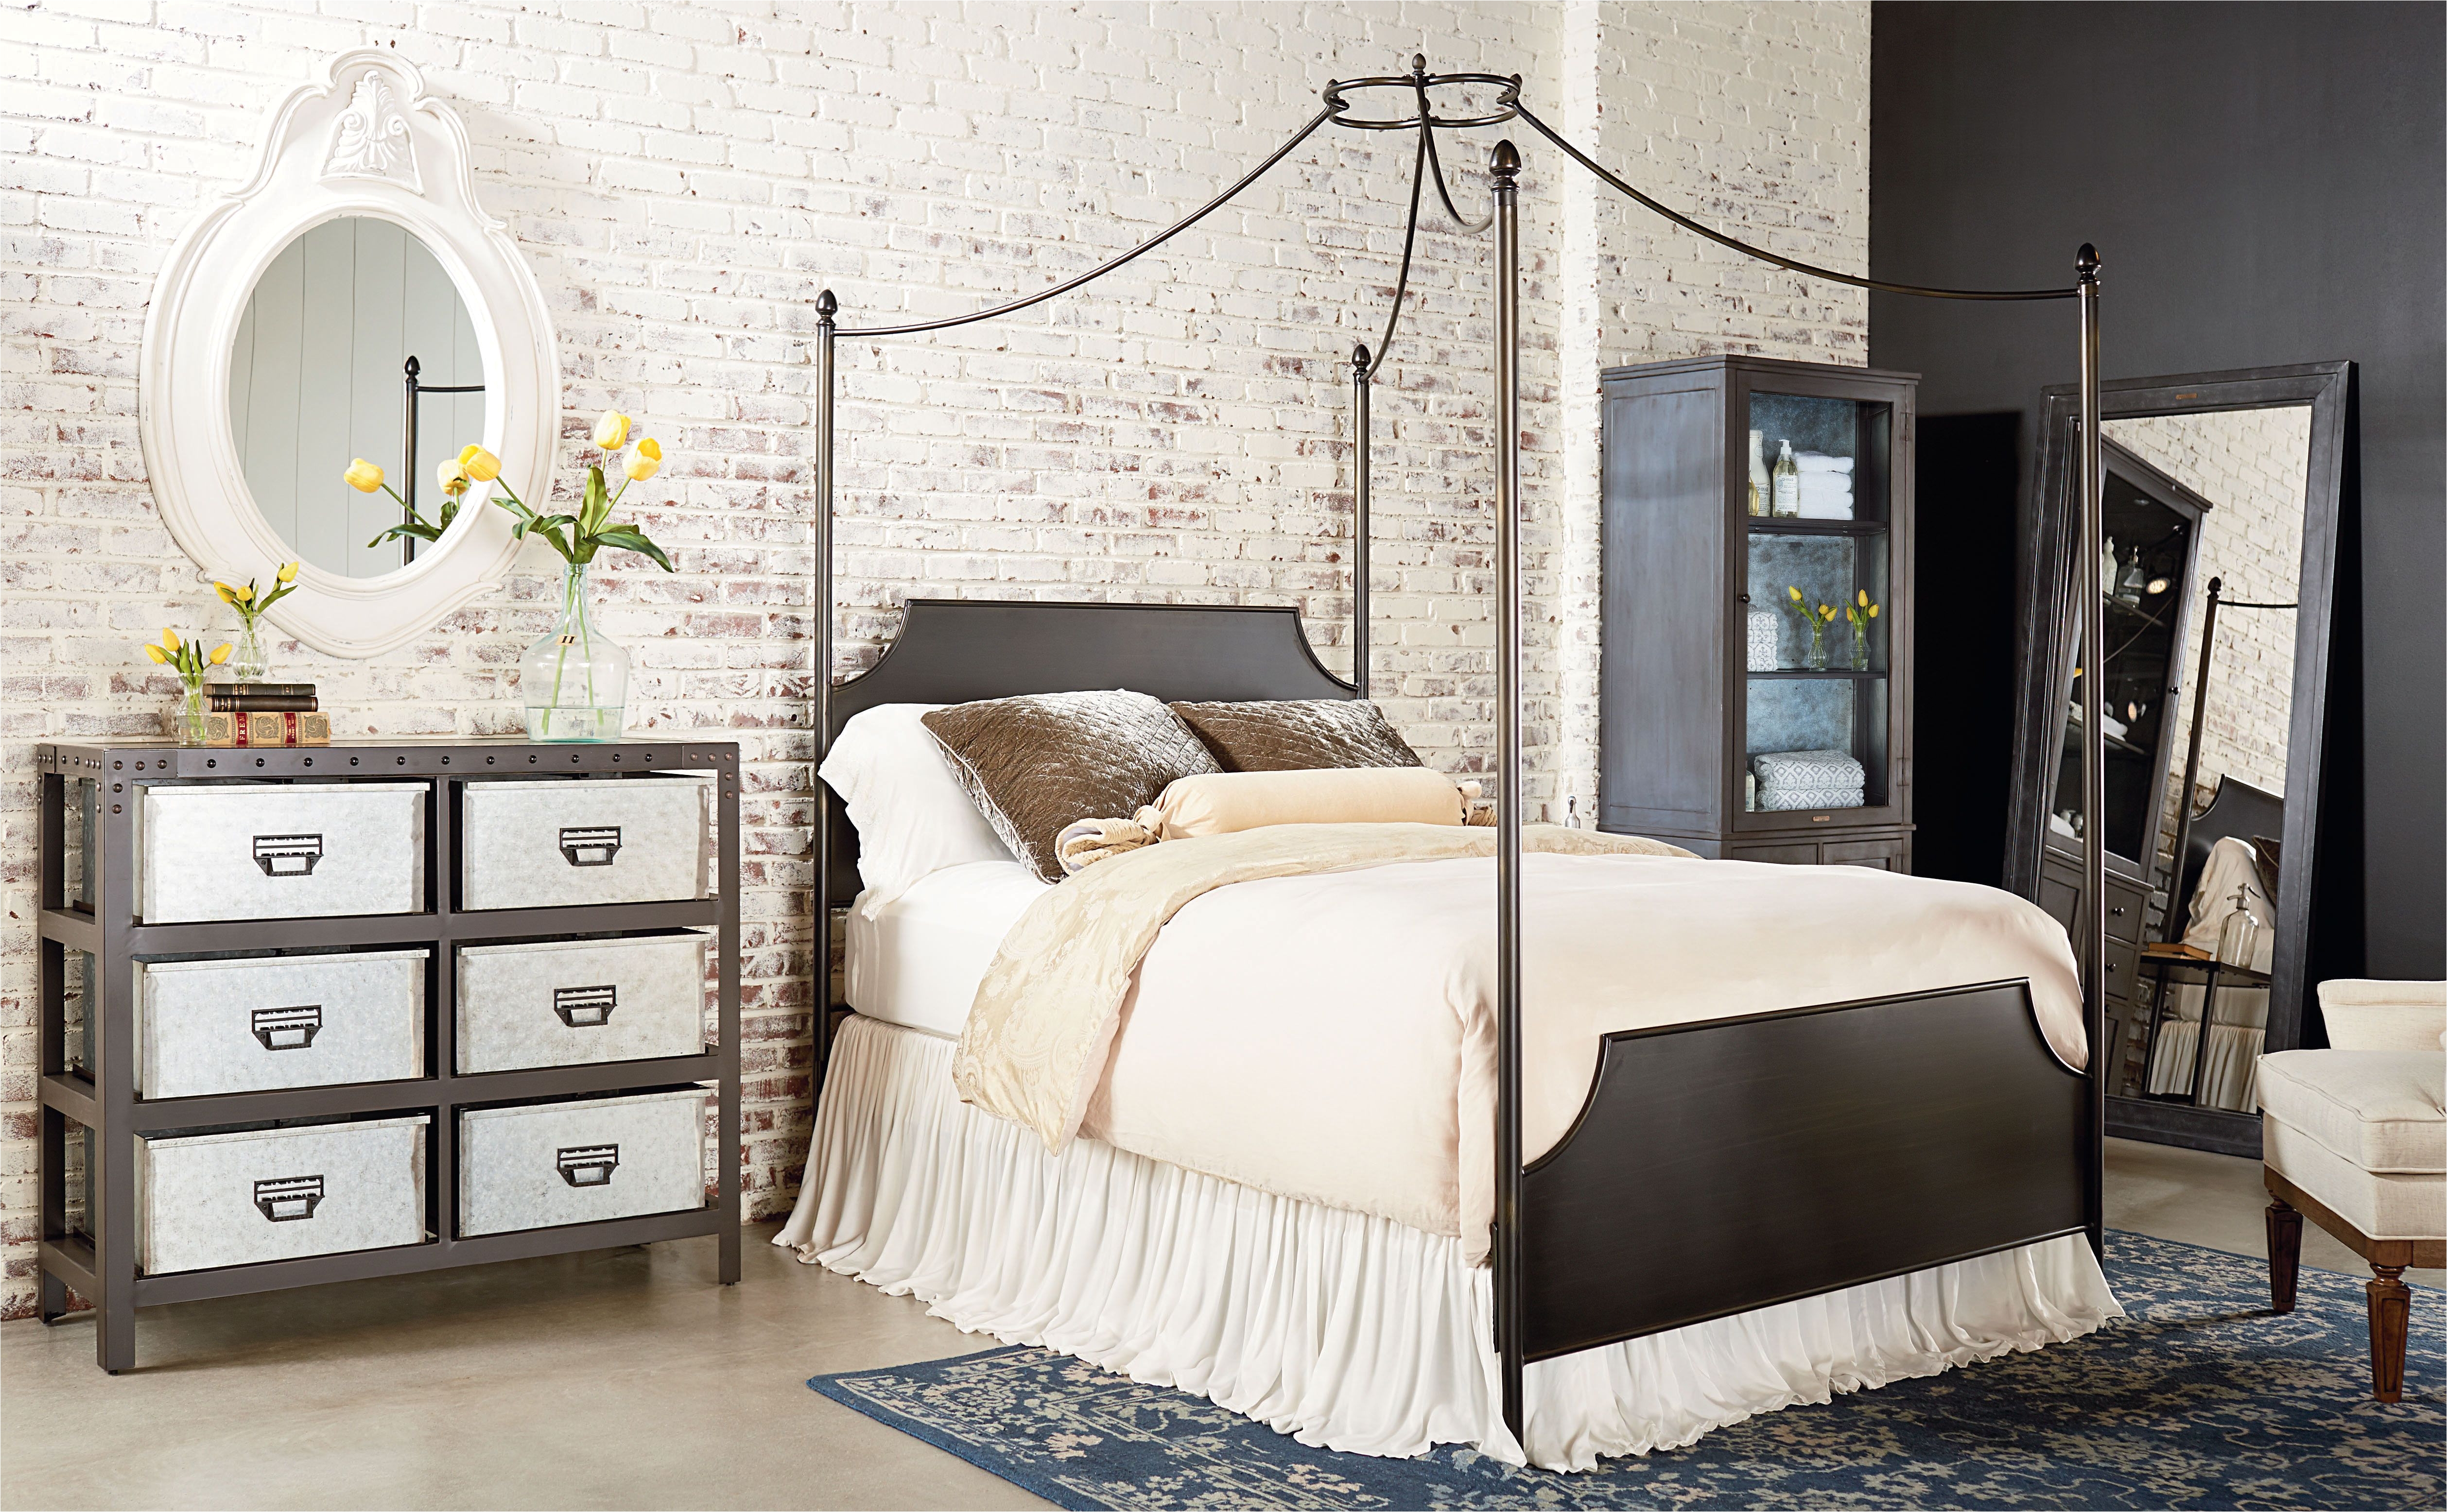 levin furniture bedroom sets lovely magnolia home by joanna gaines at levin furniture spring summer of